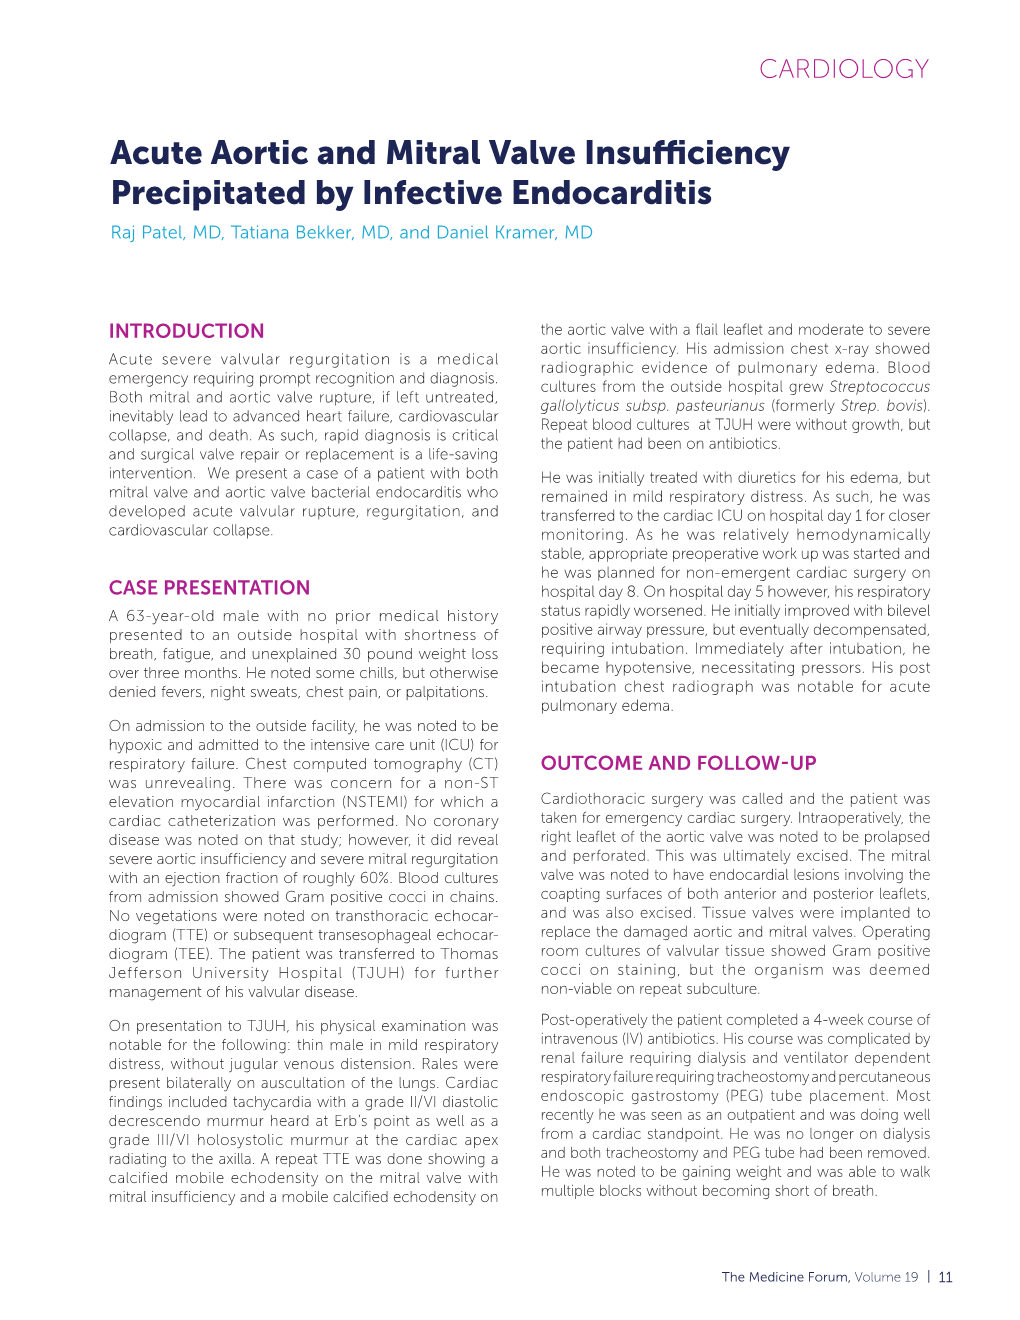 Acute Aortic and Mitral Valve Insufficiency Precipitated by Infective Endocarditis Raj Patel, MD, Tatiana Bekker, MD, and Daniel Kramer, MD